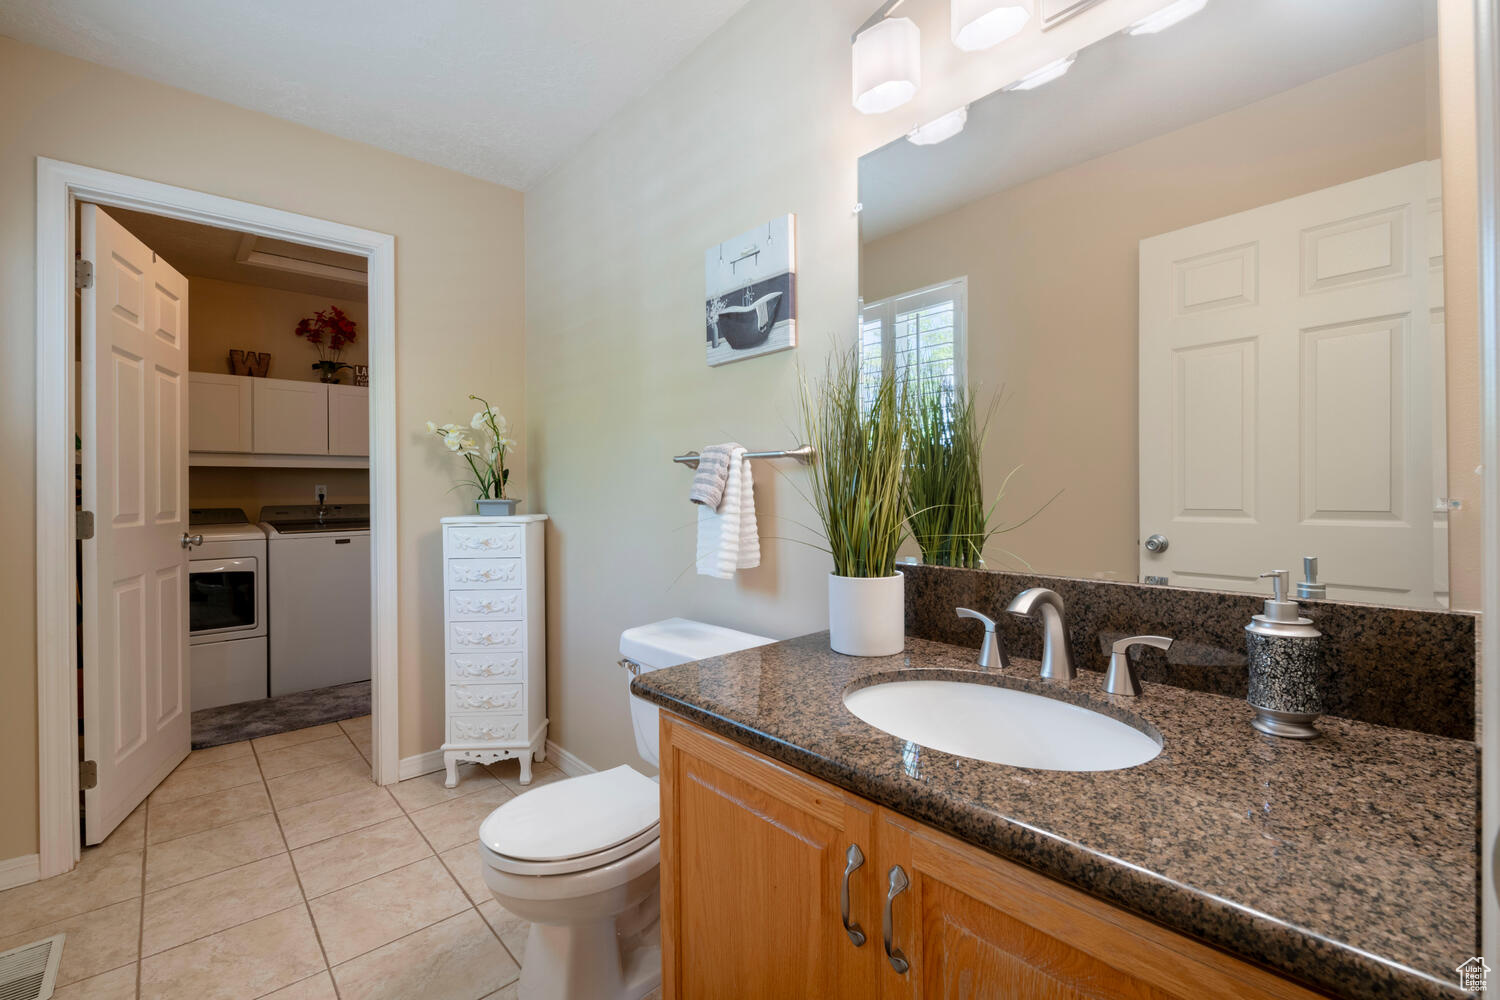 Half bathroom with tile floors and granite vanity, adjacent to washer and dryer.